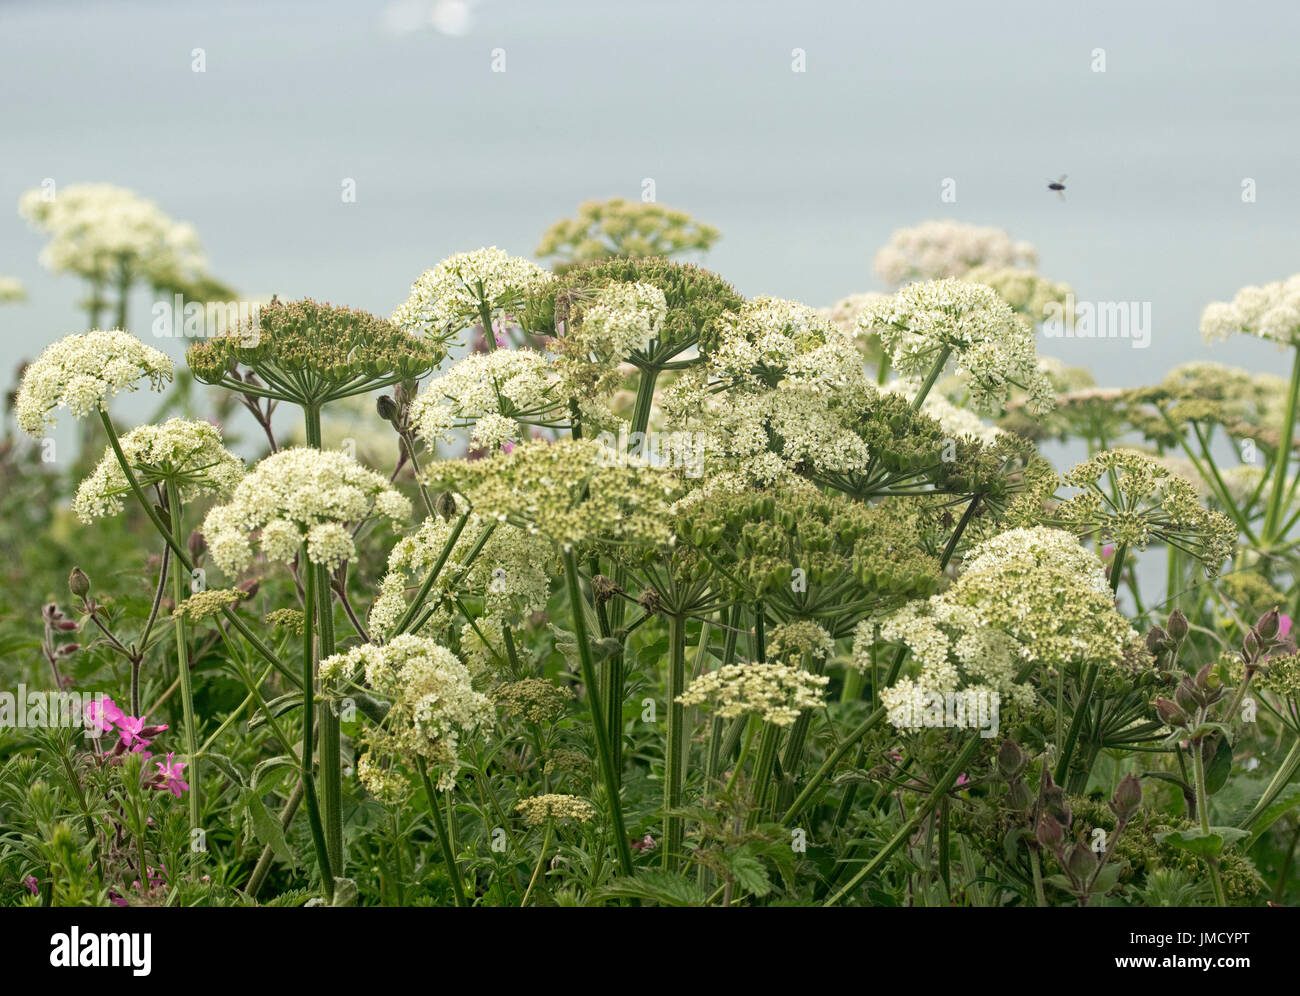 Cluster of white flowers of cow parsley, Anthriscus sylvestris, against light blue sky Stock Photo